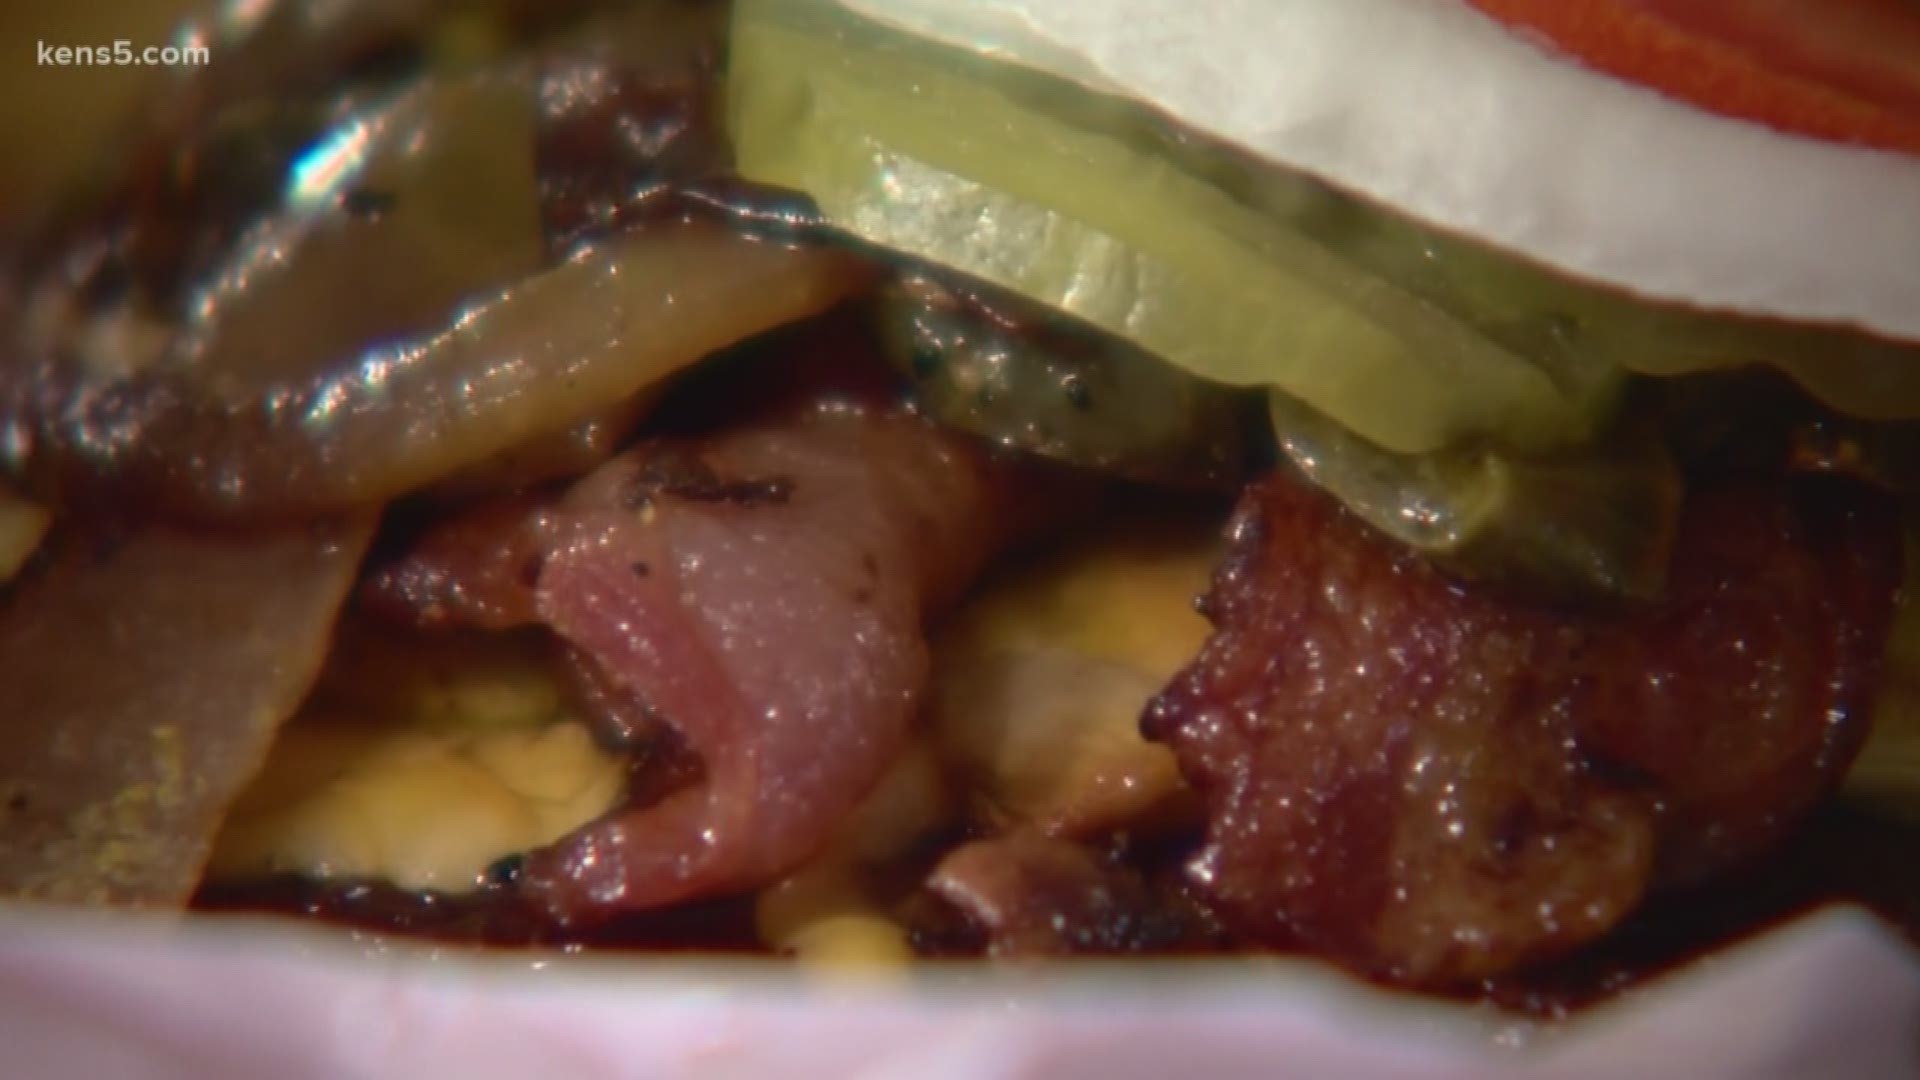 Neighborhood Eats continues the mouthwatering search for the best burger in San Antonio.